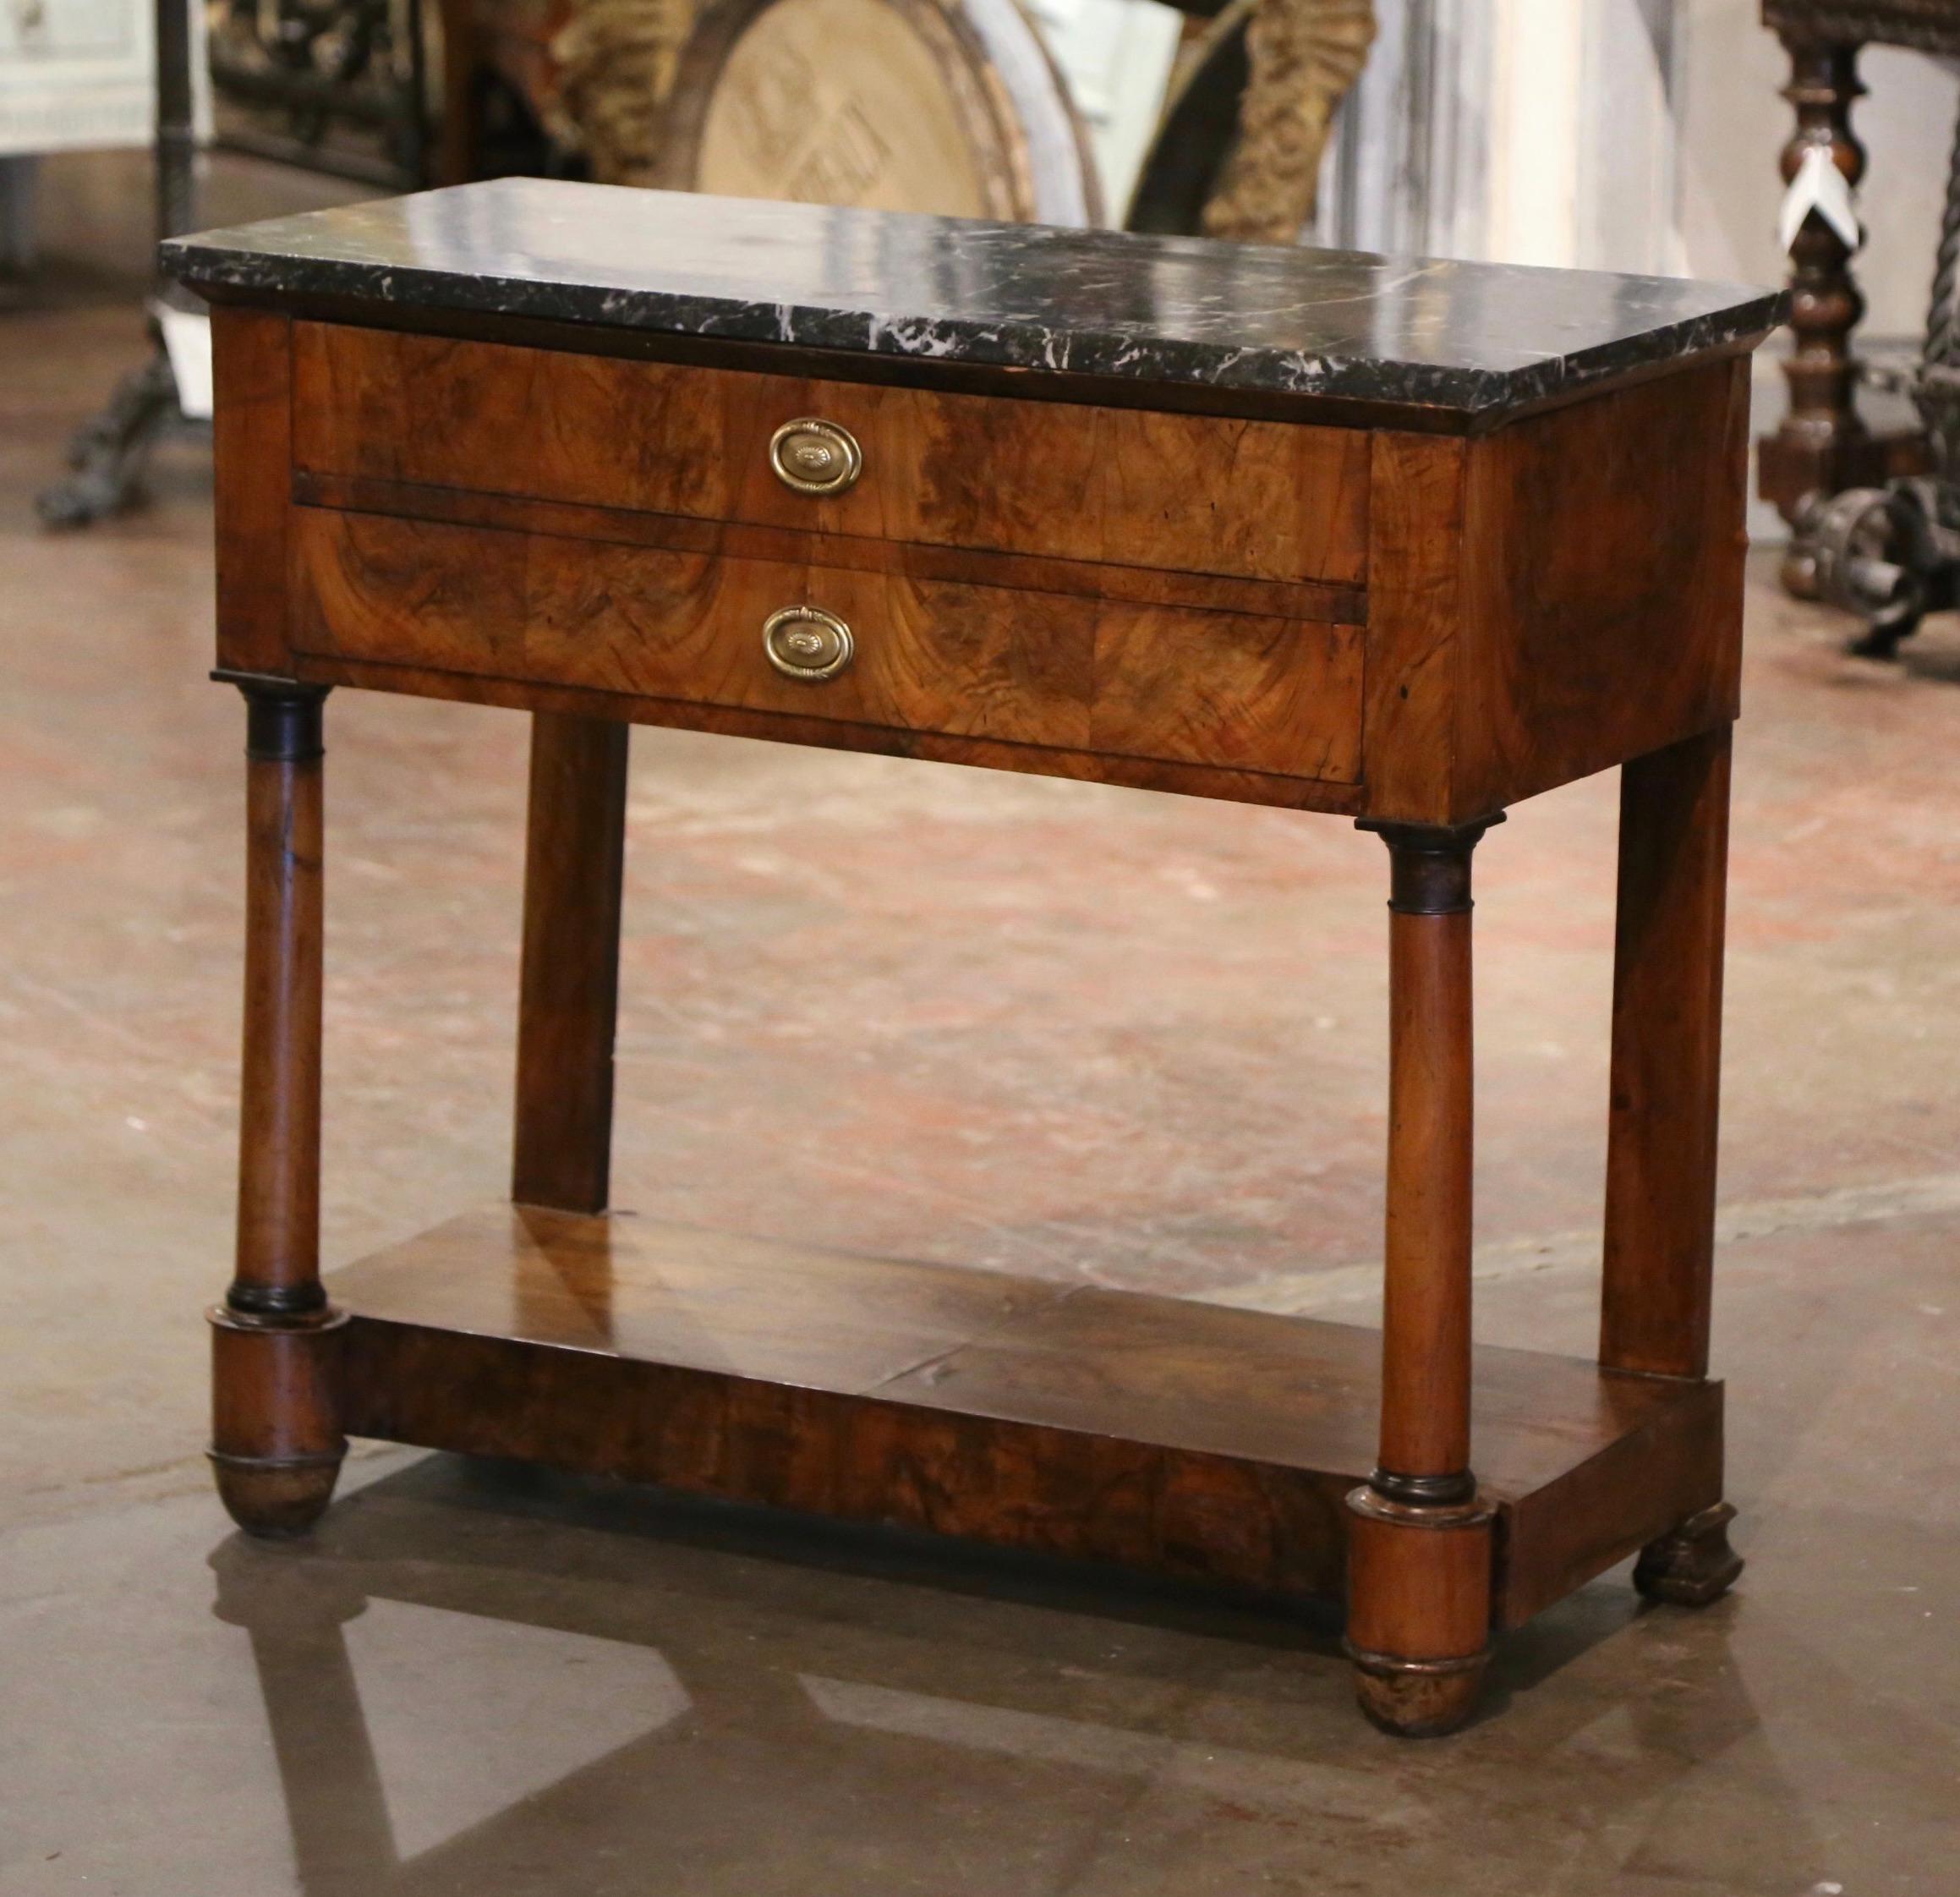 Early 19th Century French Empire Marble Top Carved Mahogany Console Table For Sale 1